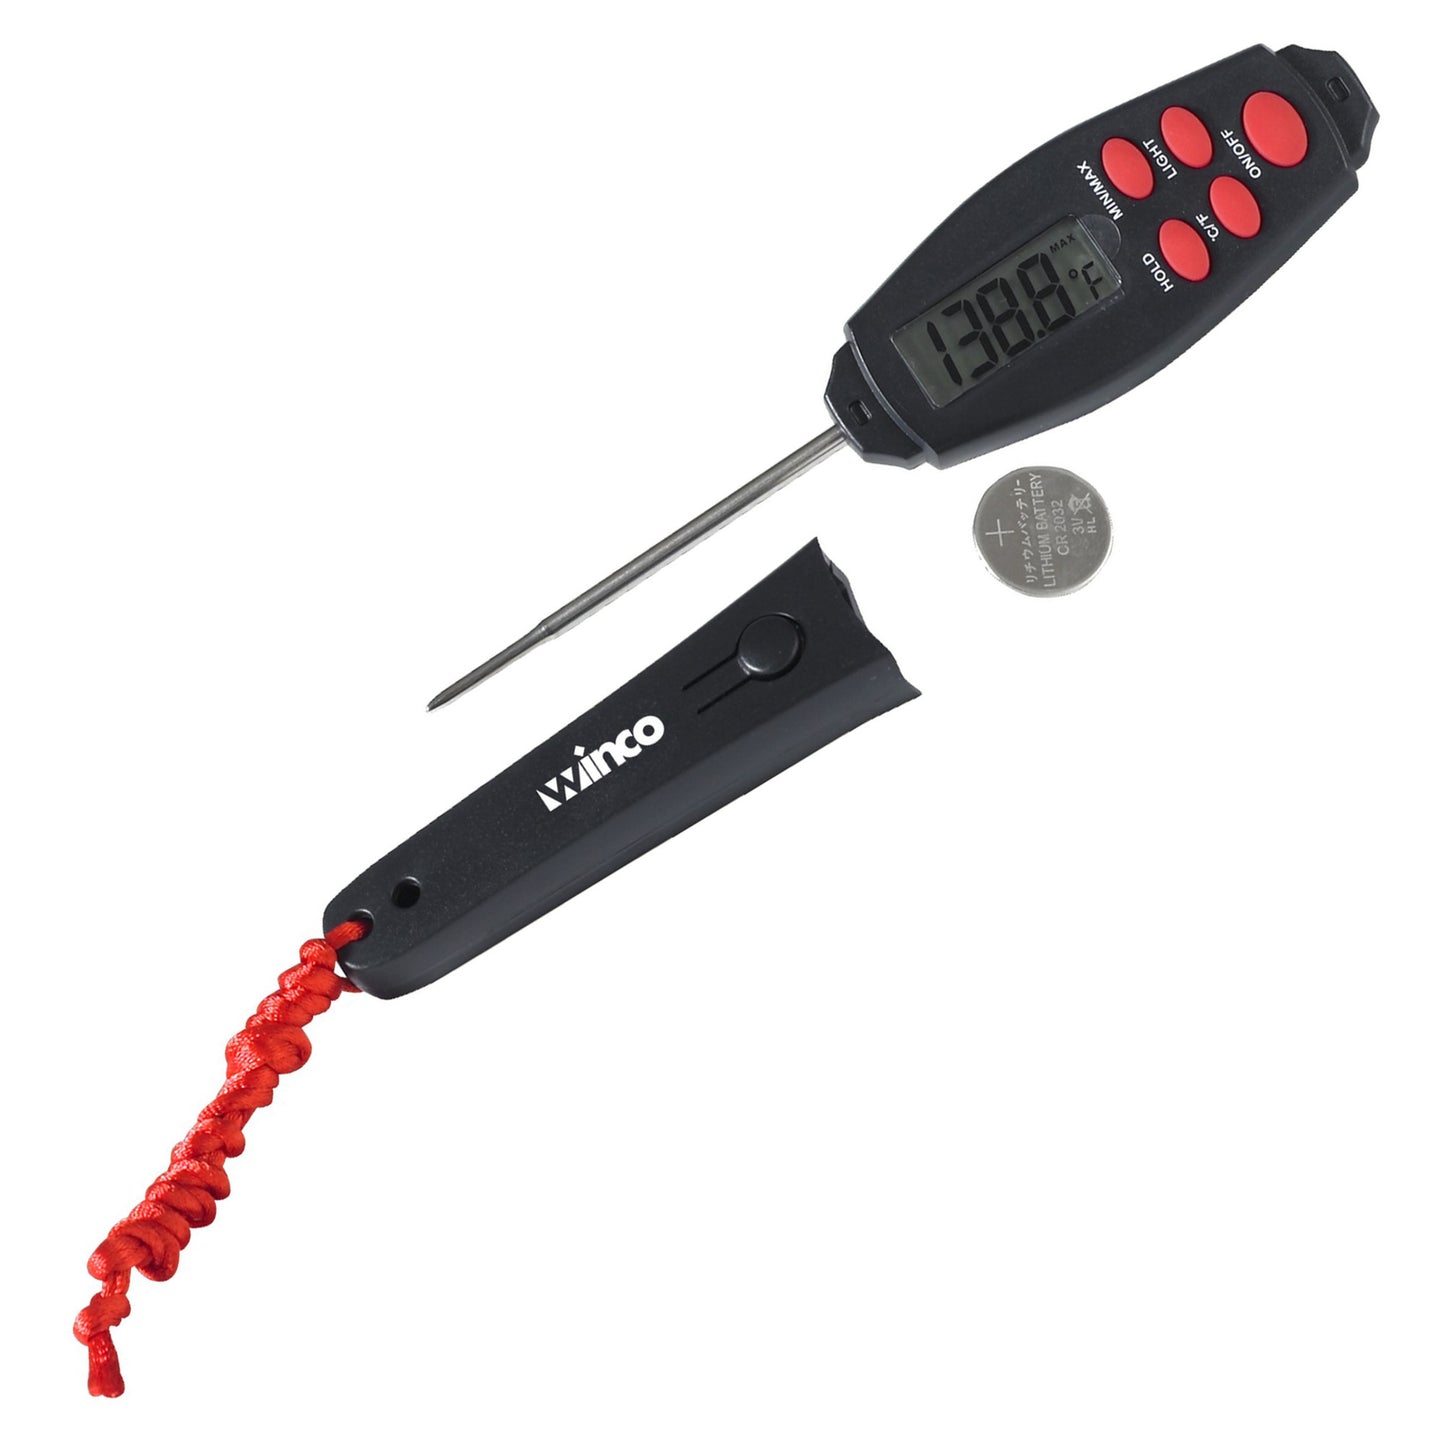 Digital Thermometer, 1-3/8" LCD, 2-7/8" Probe